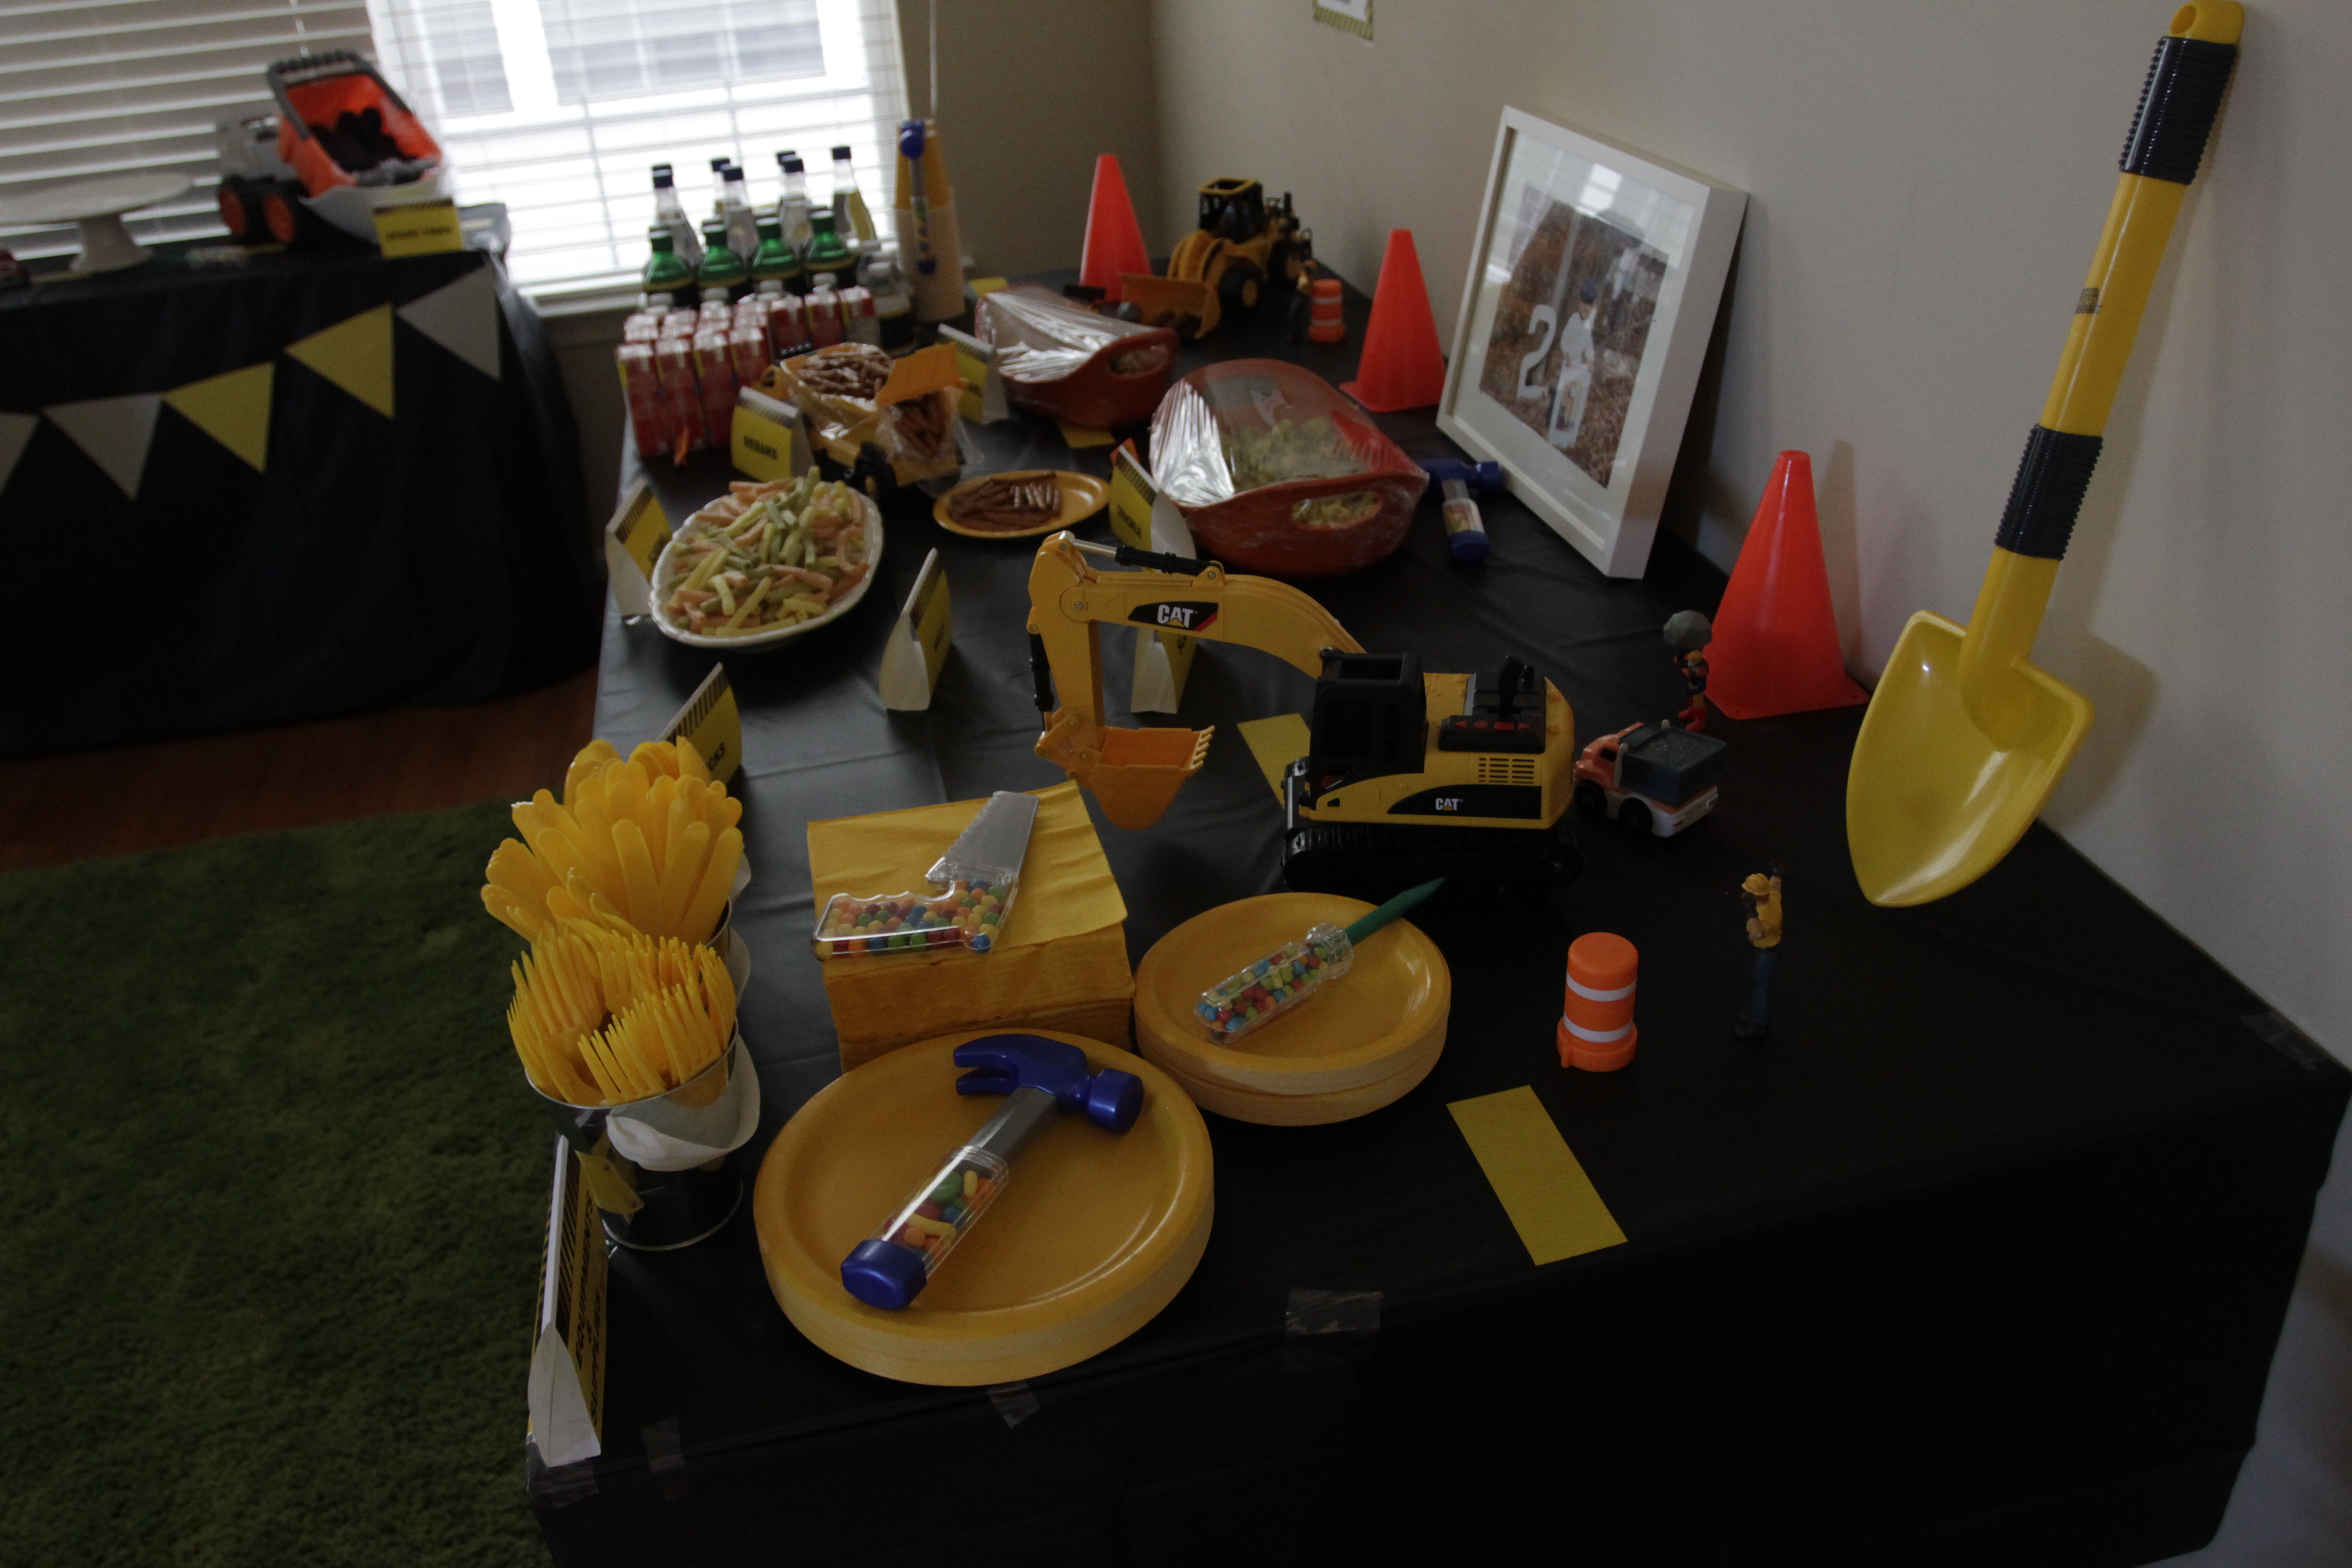 Construction Birthday Party Food Table